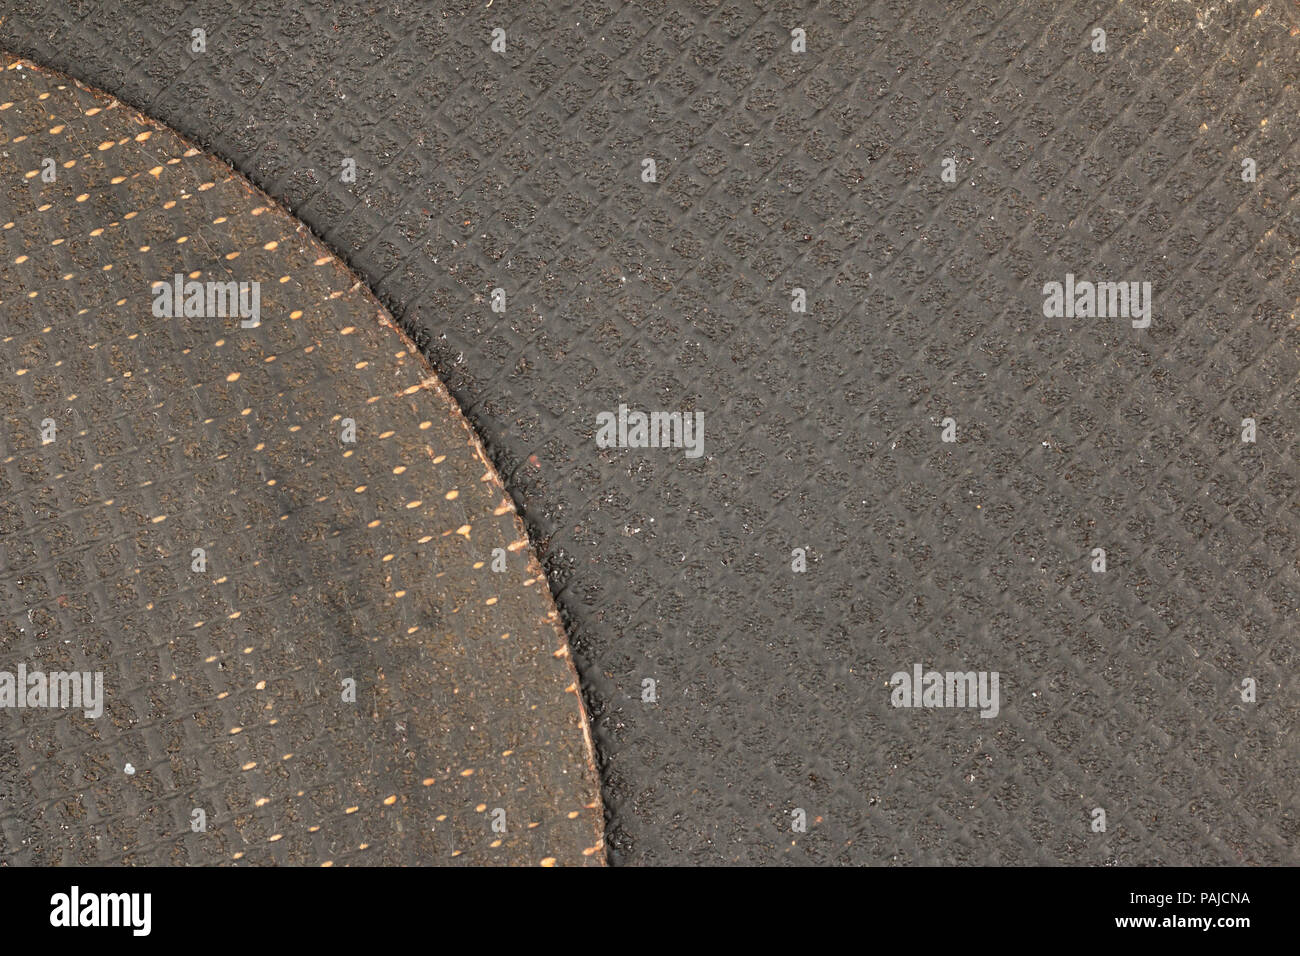 Texture, close-up of a cutting disc for metal. View from above Stock Photo